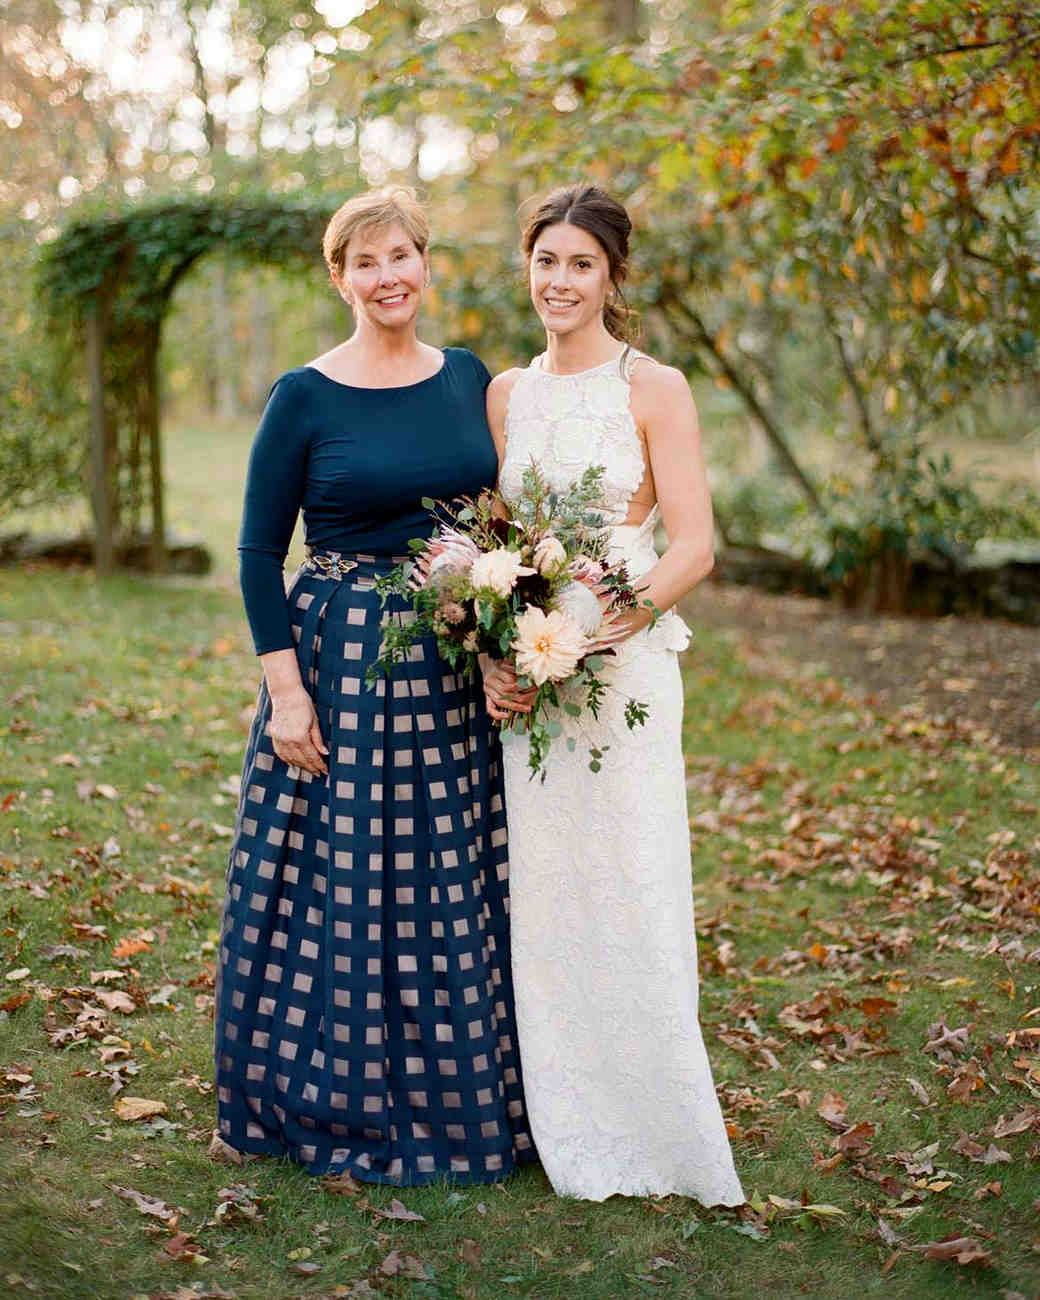 Mother-of-the-Bride Dresses That Wowed at Weddings ...